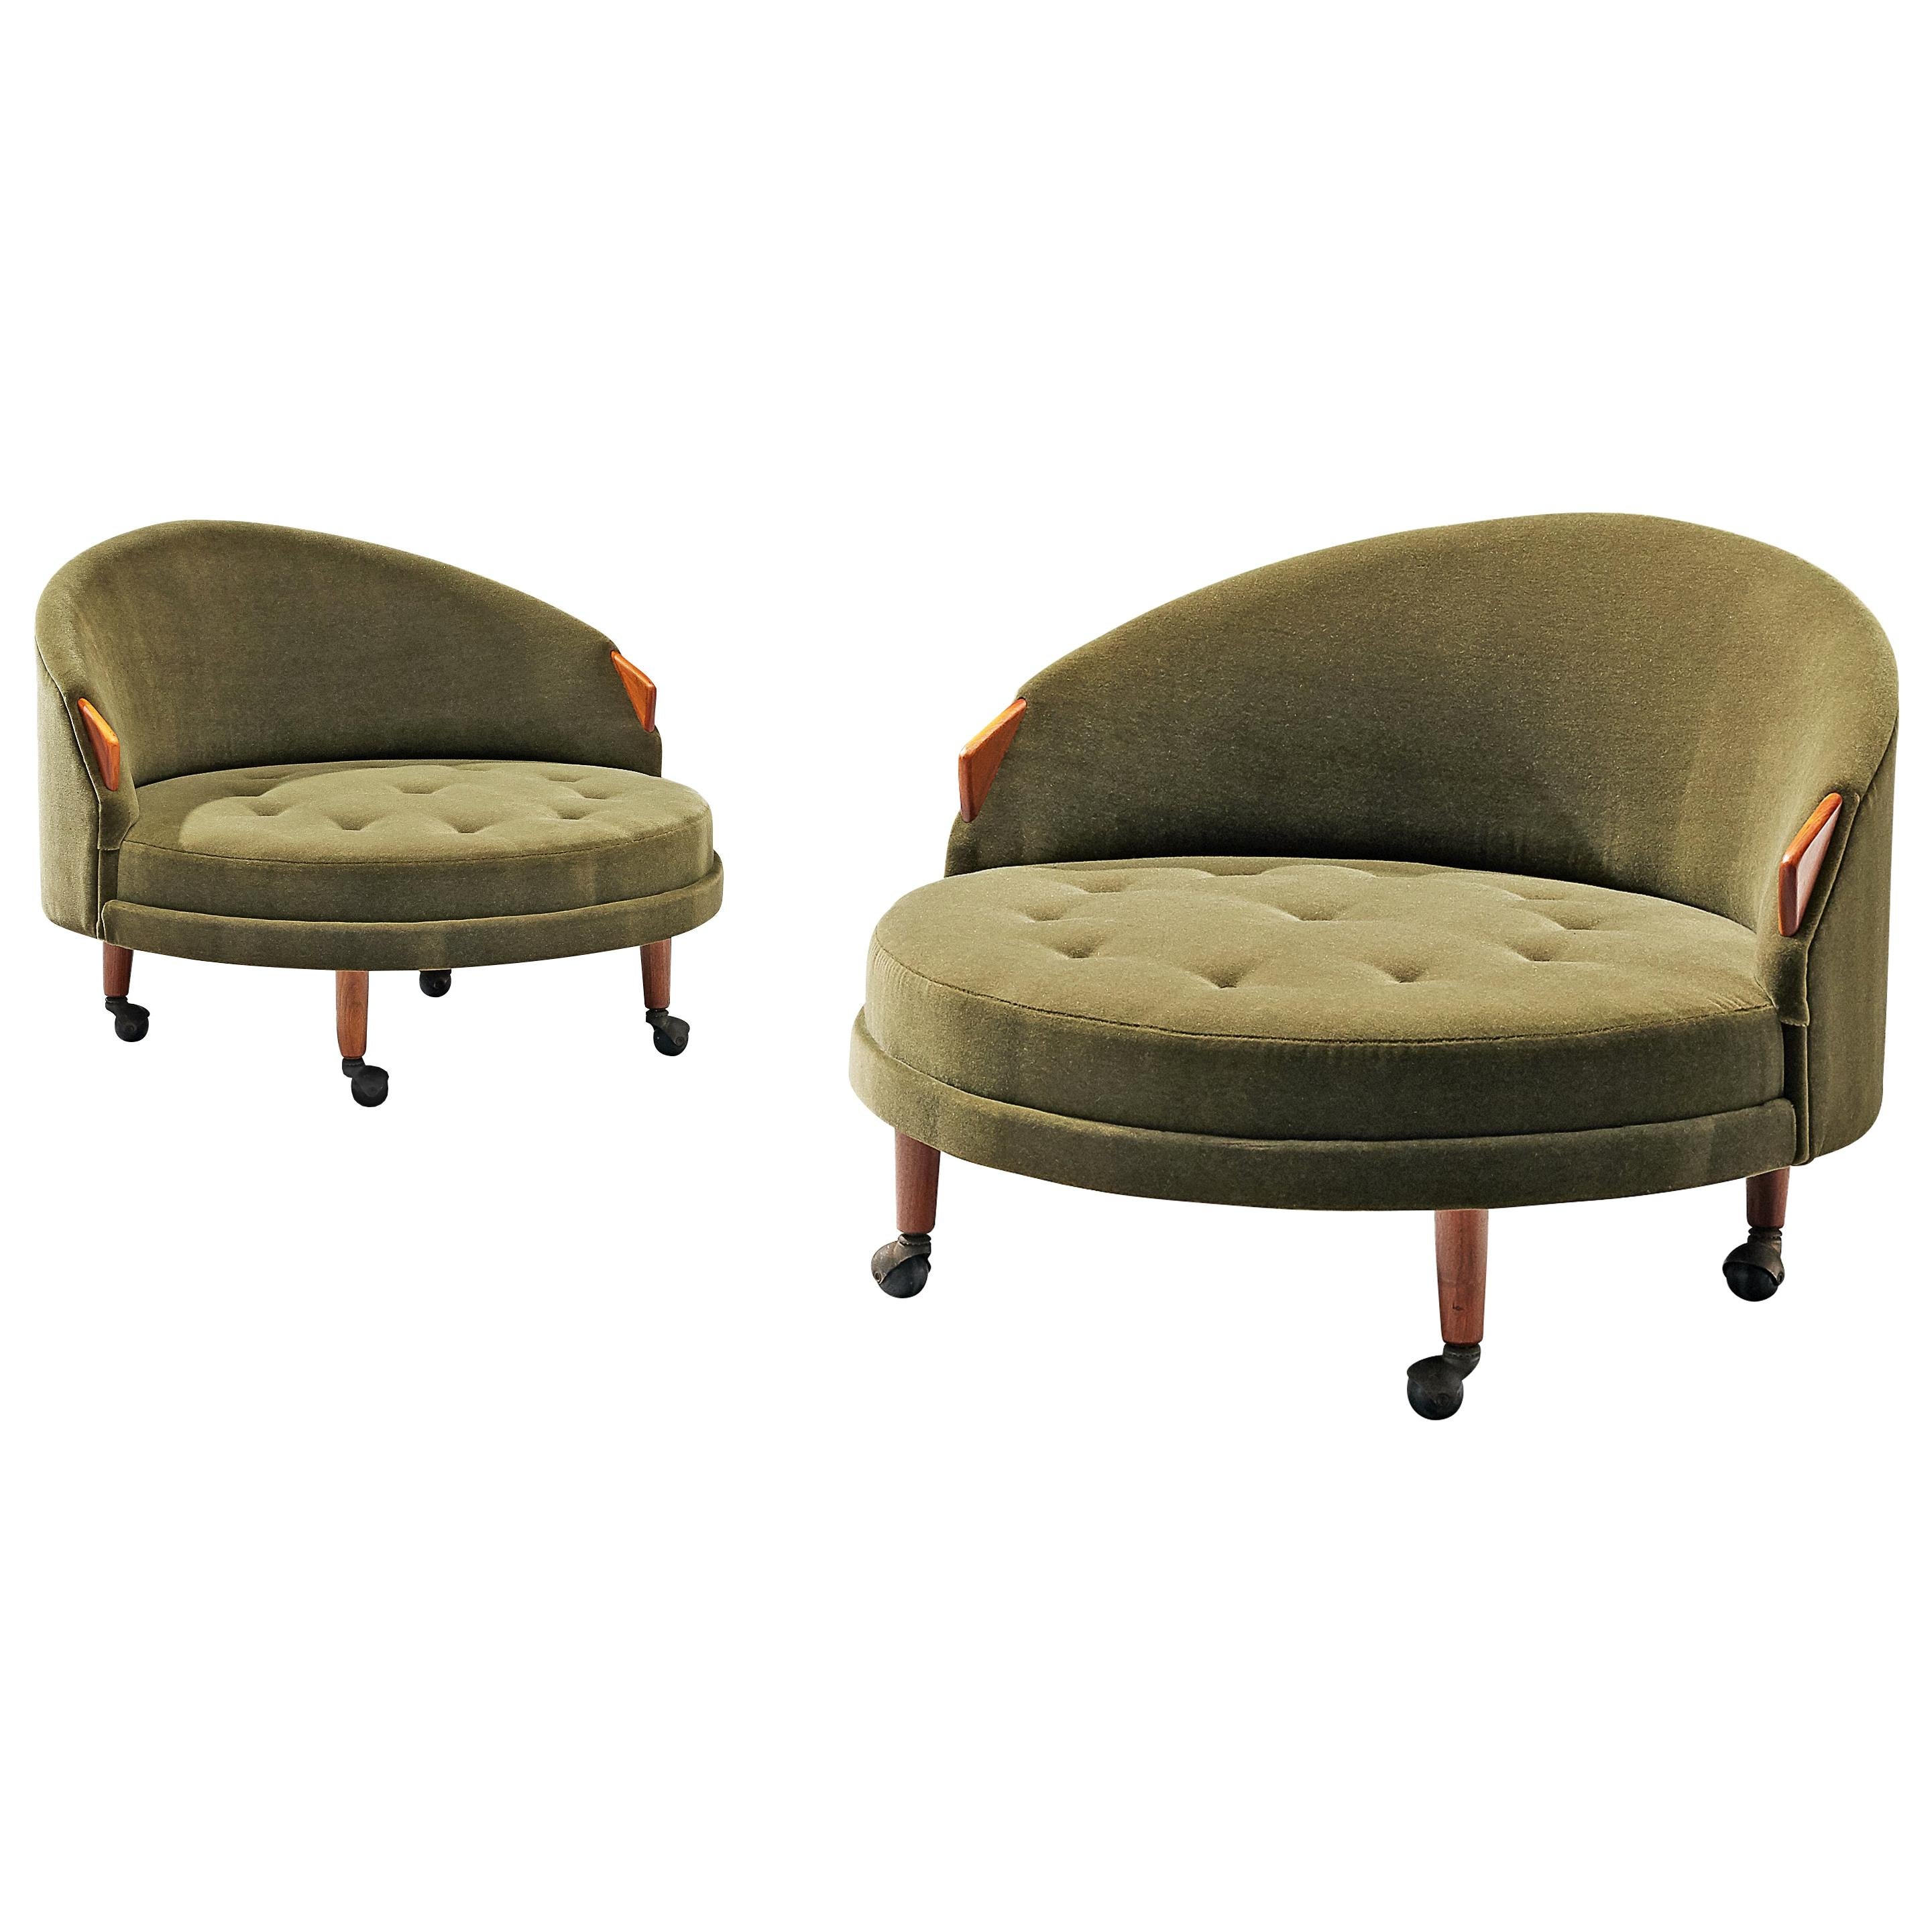 Adrian Pearsall Pair of 'Havana' Lounge Chairs in Green Pierre Frey and Walnut